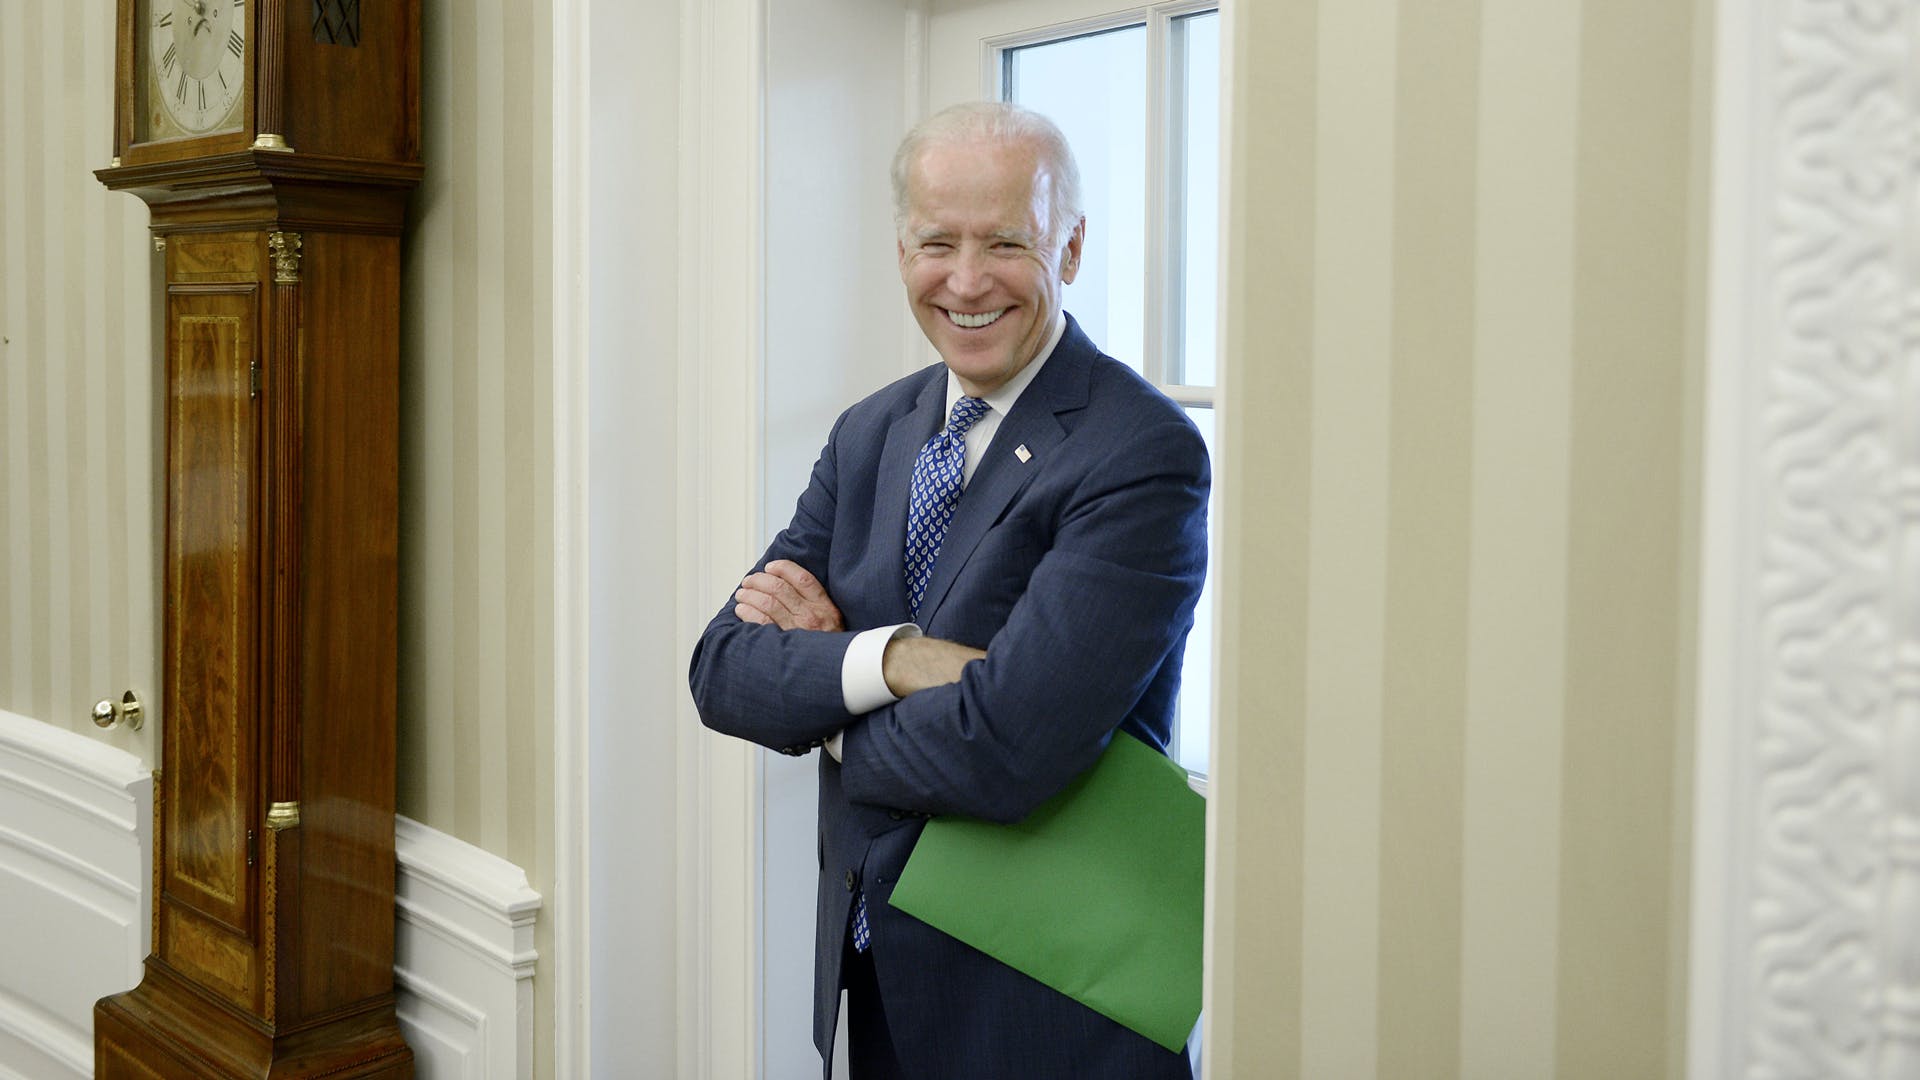 Things You May Not Know About Joe Biden